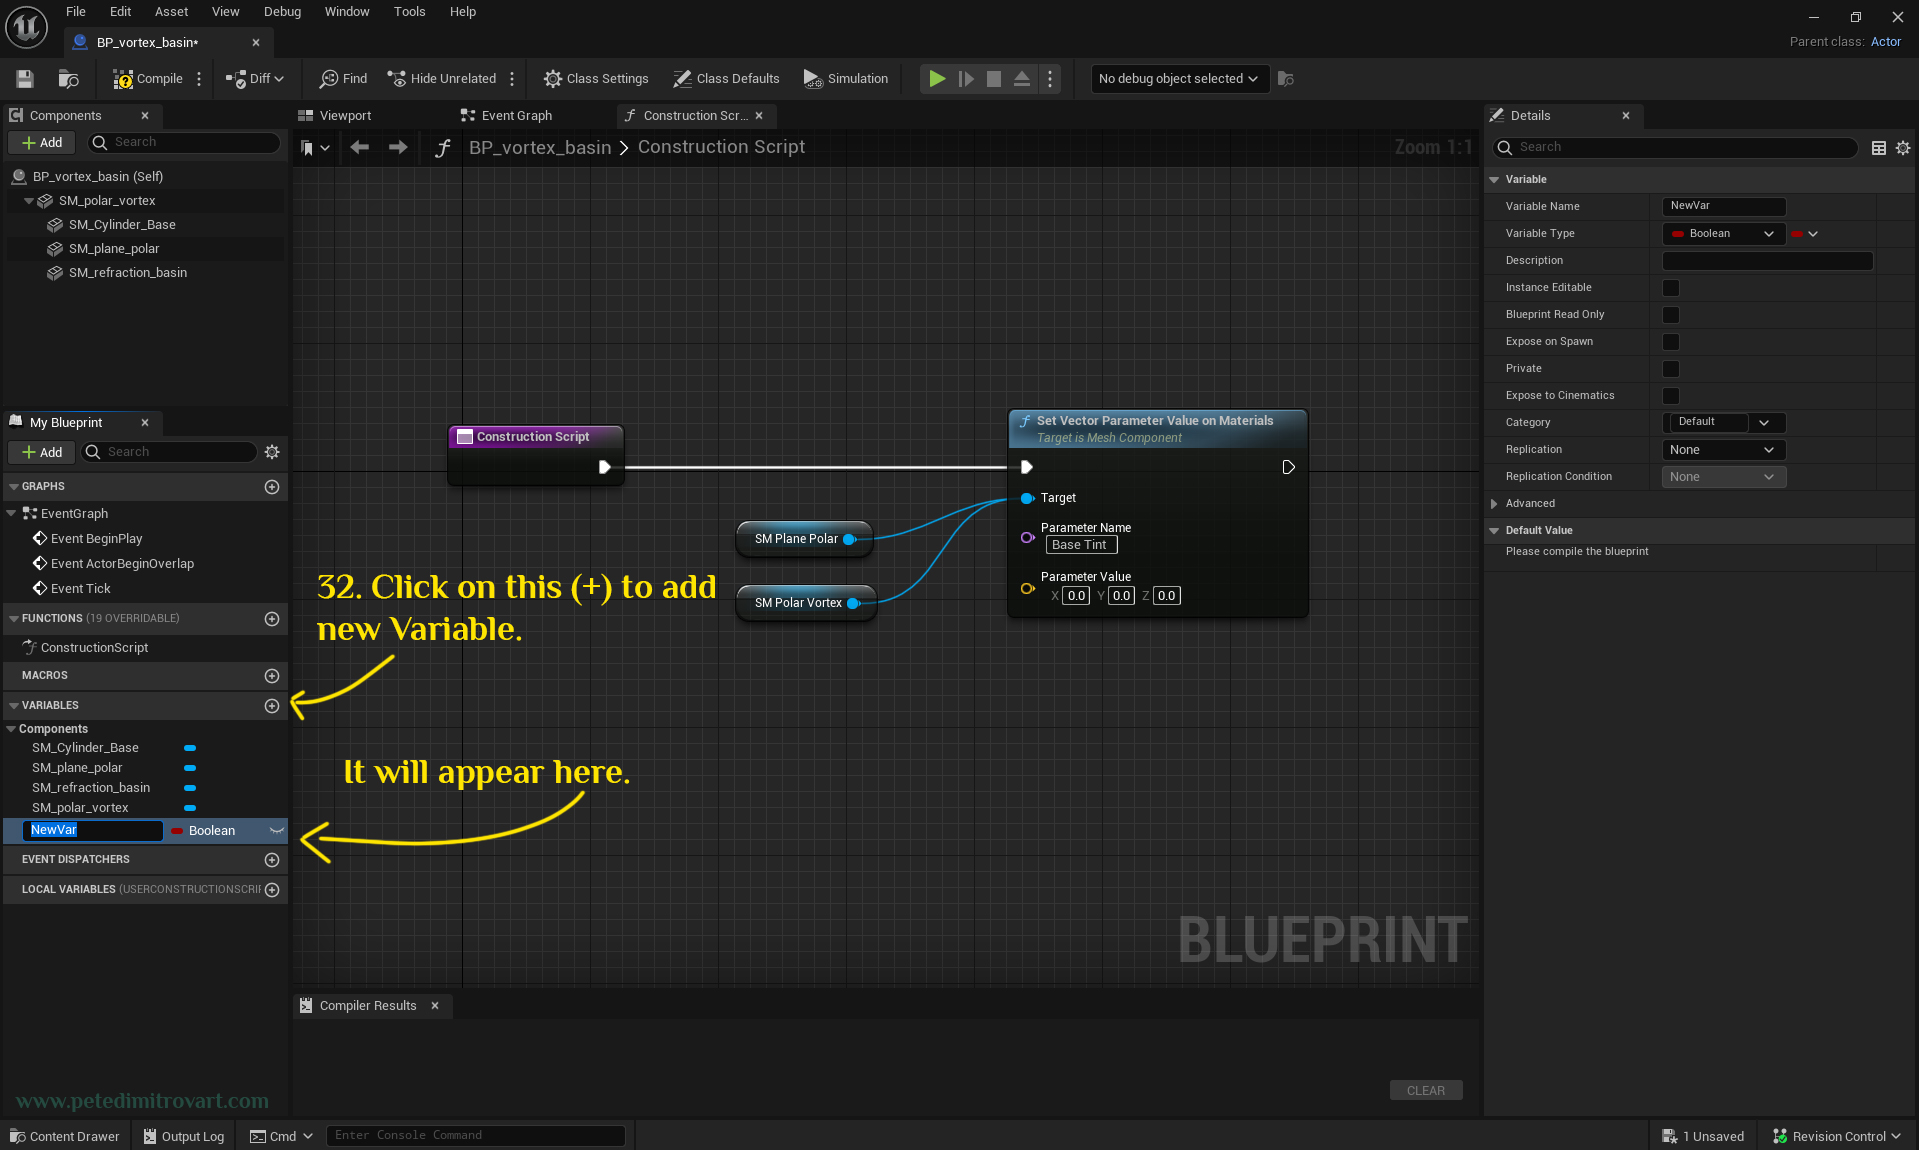 We are back to the blueprint construction scrip board and this image showcases it. An arrow to the left points at a plus sign next to “VARIABLES”. Clicking it starts making a new variable that by default has red color that indicates a Boolean type.